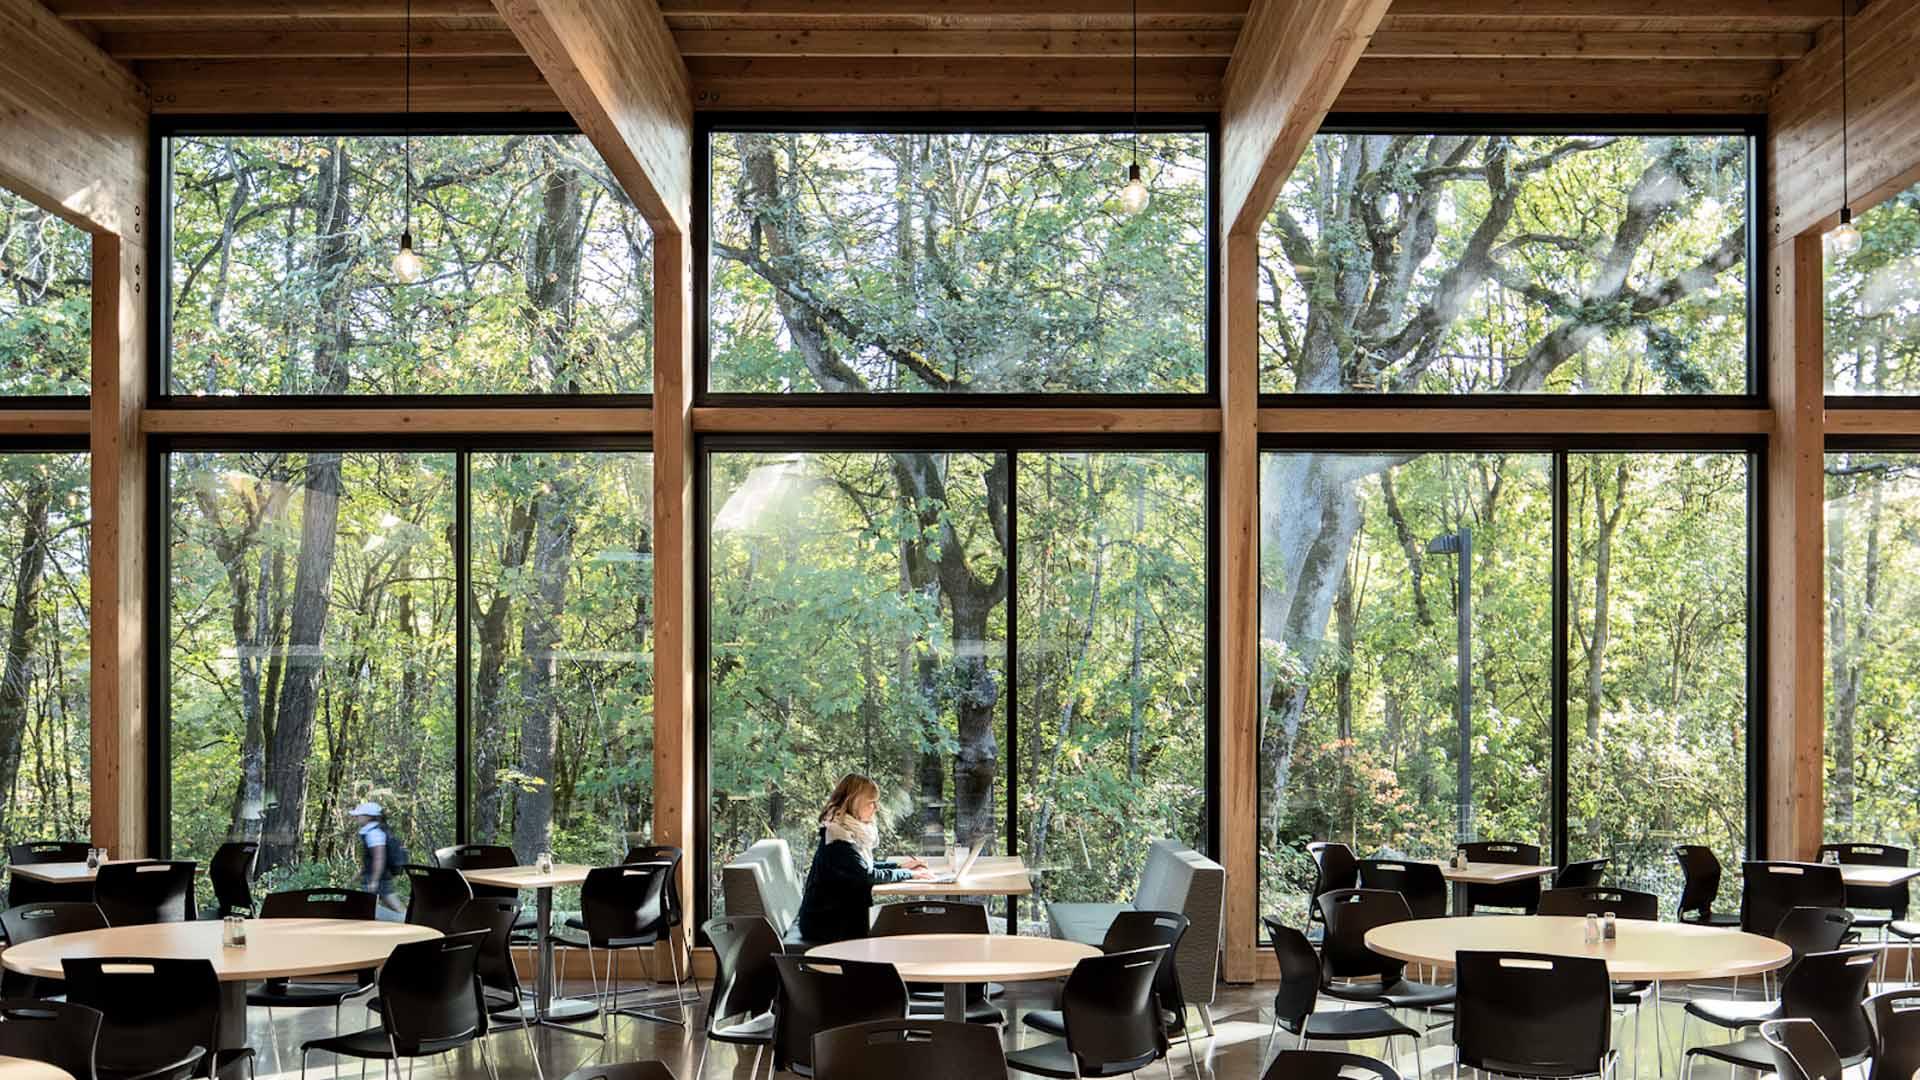 Canyon Commons photo - a large bank of windows in a mass timber building look out at a wooded area. a woman sits at a table in the foreground.